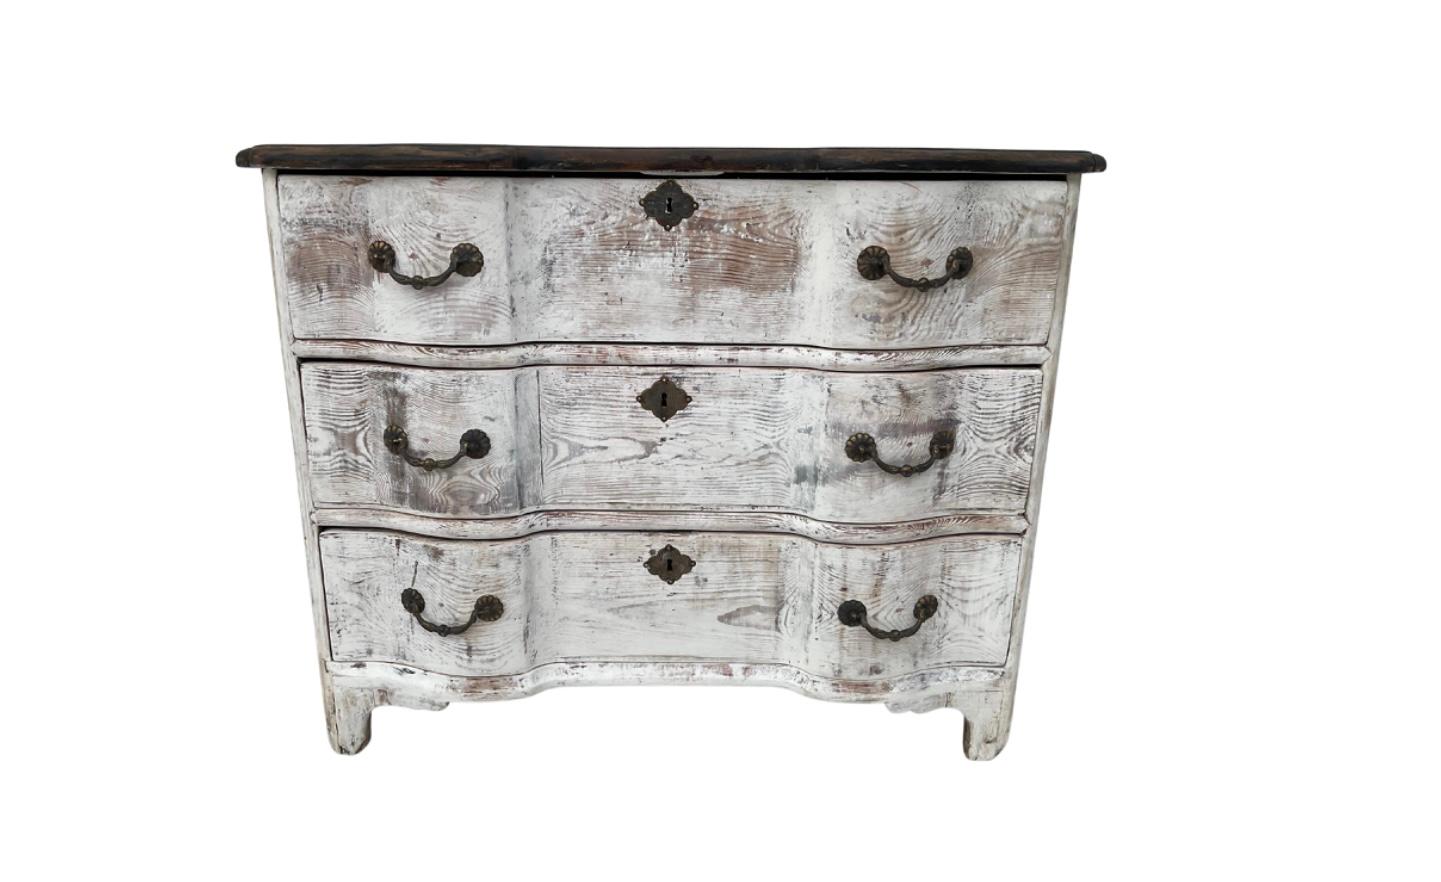 18th Century Dutch Rococo Period Serpentine Front Painted Commode In Good Condition For Sale In Bradenton, FL